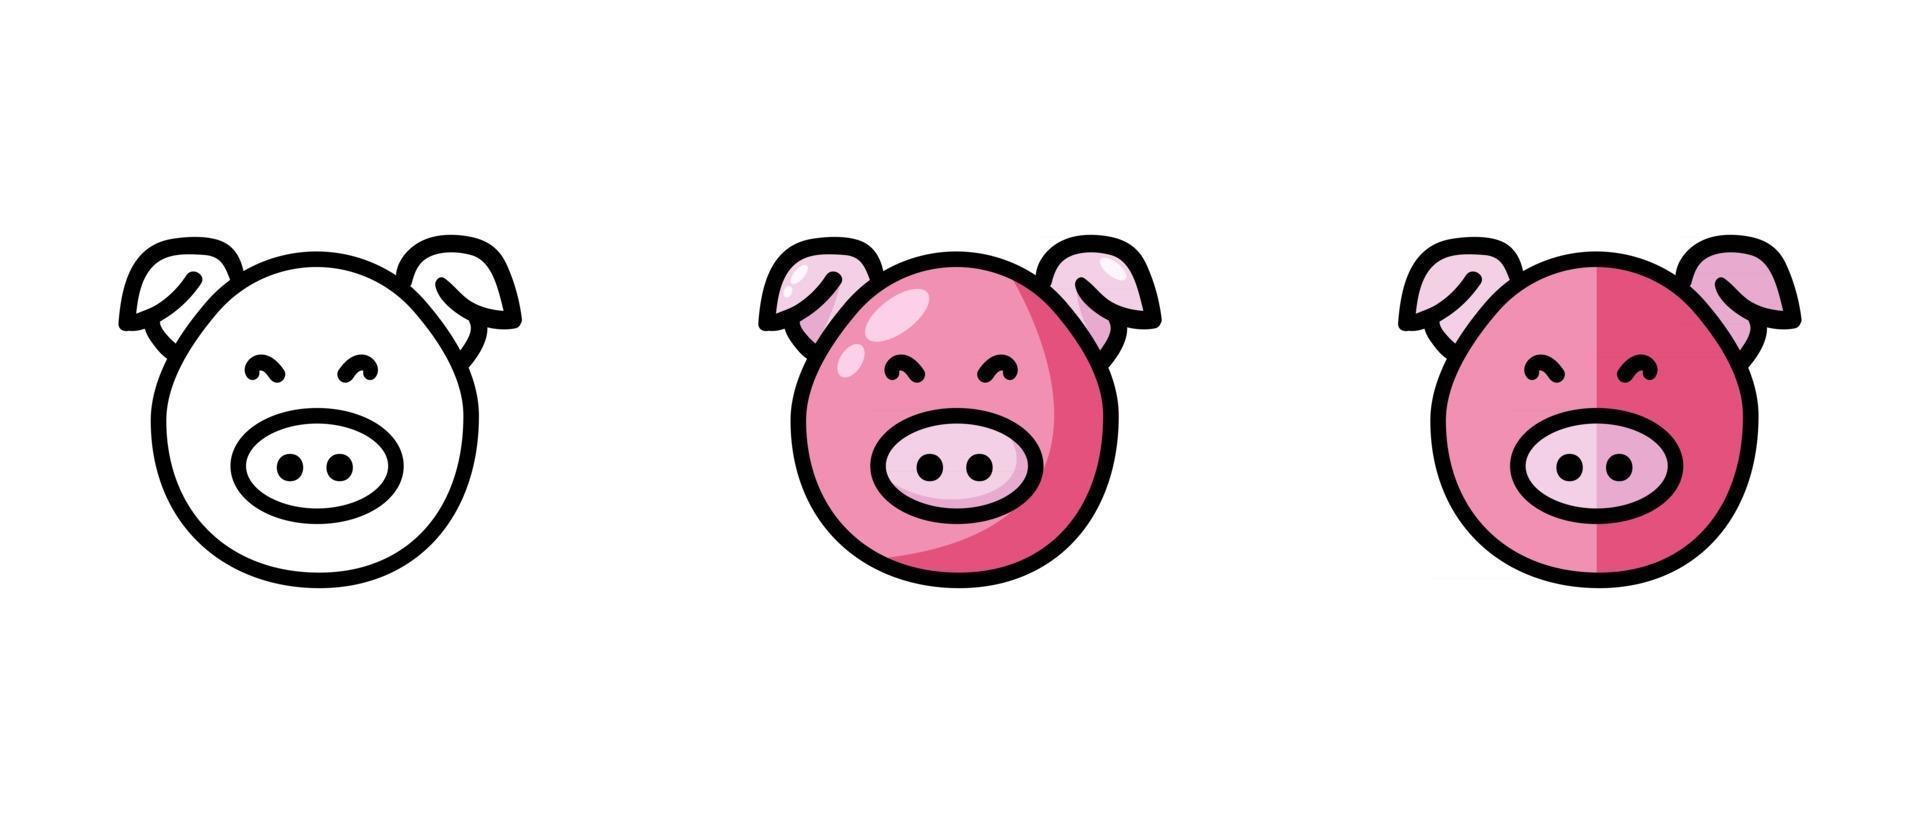 Outline and color symbols of a pig vector